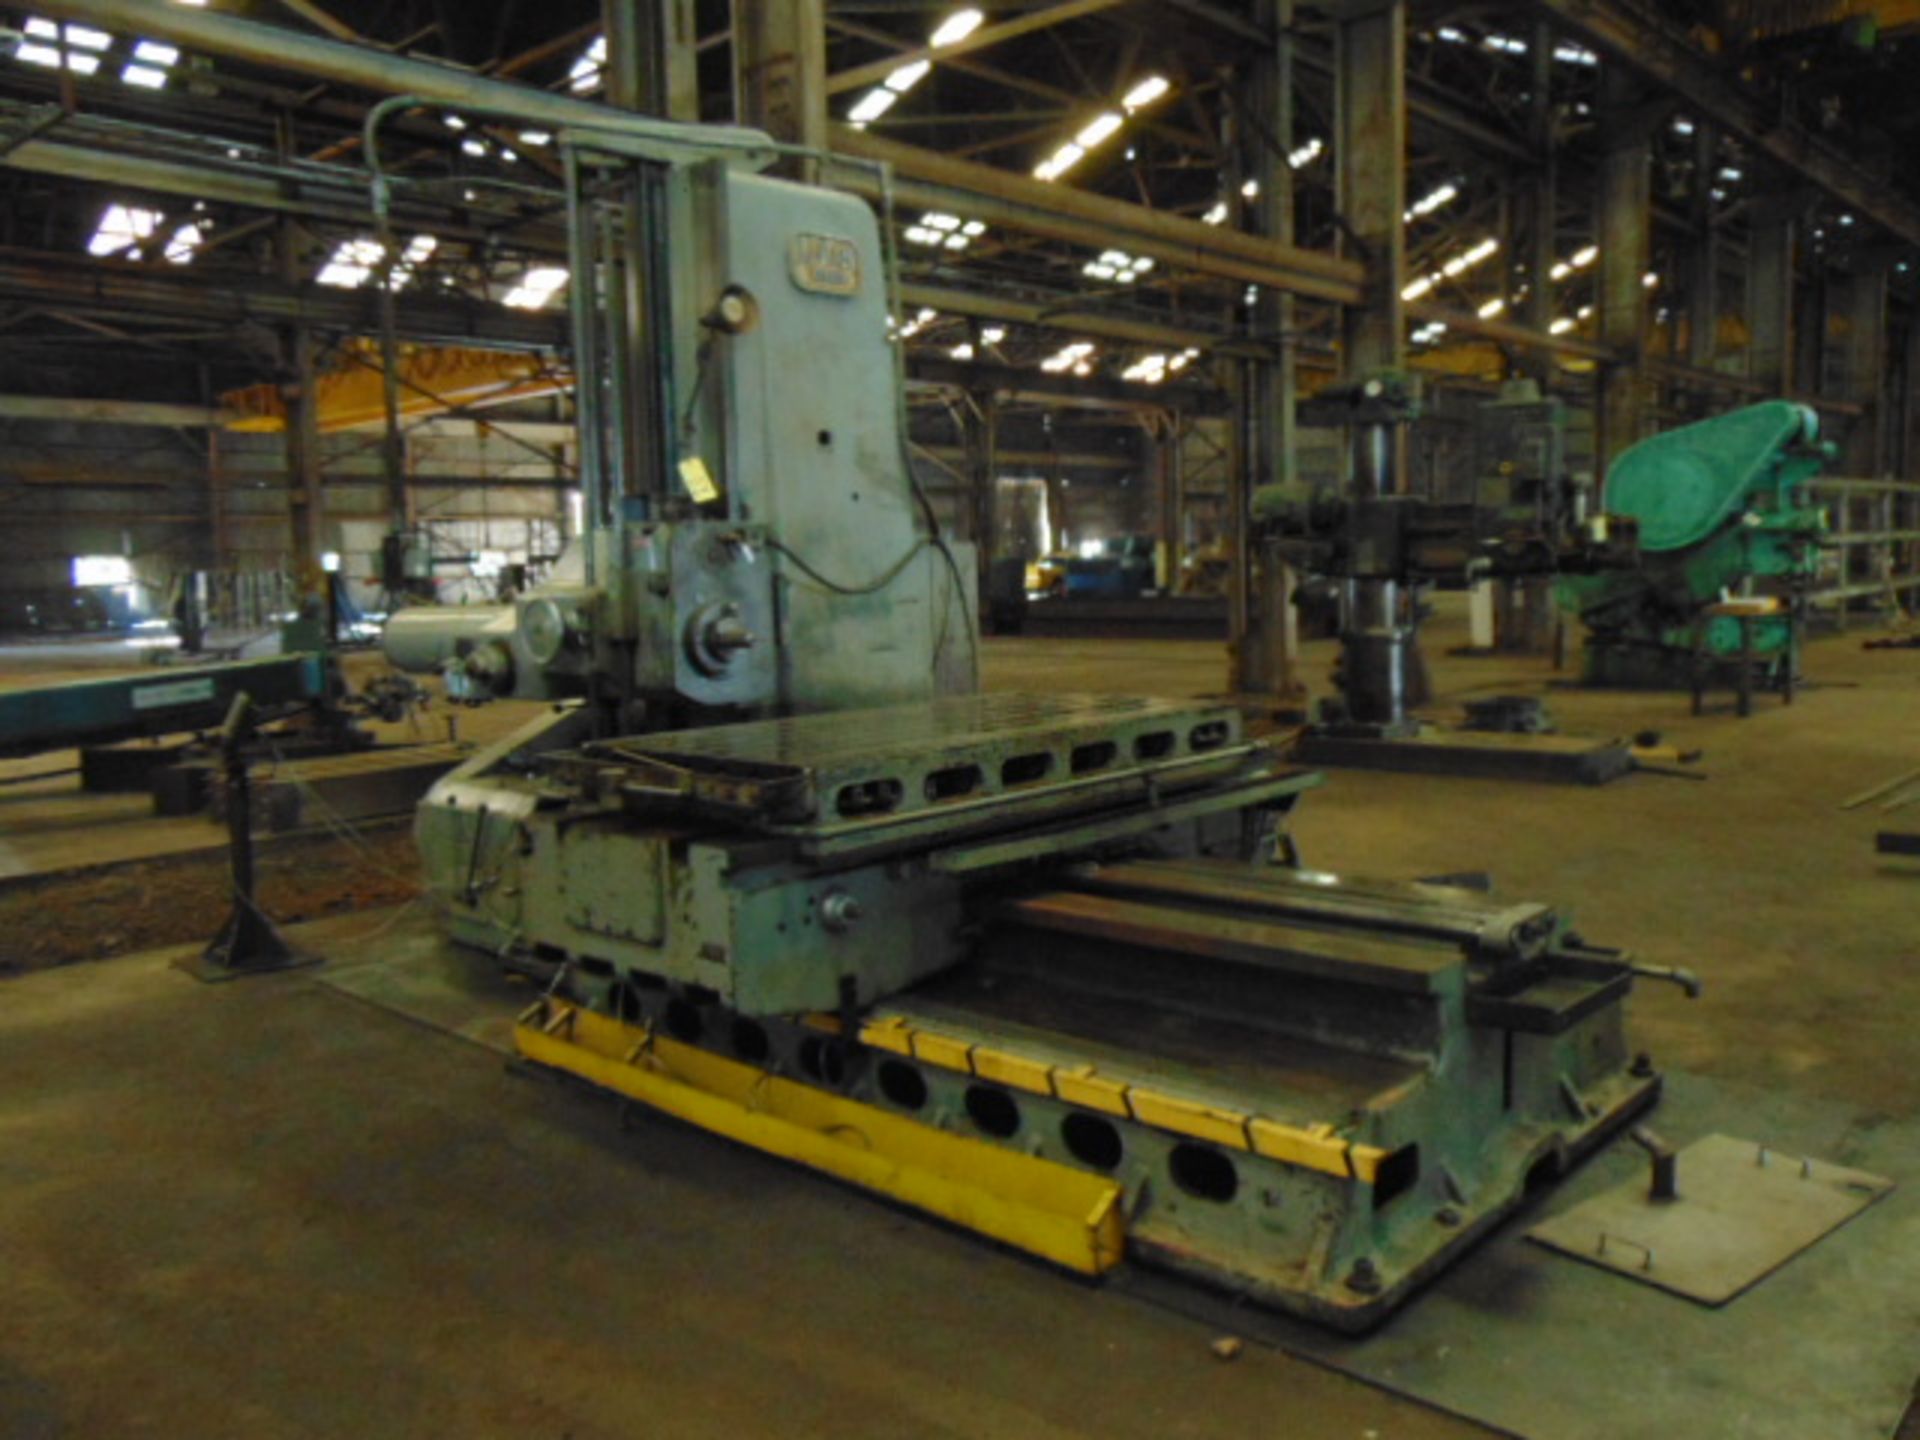 TABLE TYPE HORIZONTAL BORING MILL, LUCAS MDL. 428-60, 40" x 74" tbl., 60" cross travel, approx.